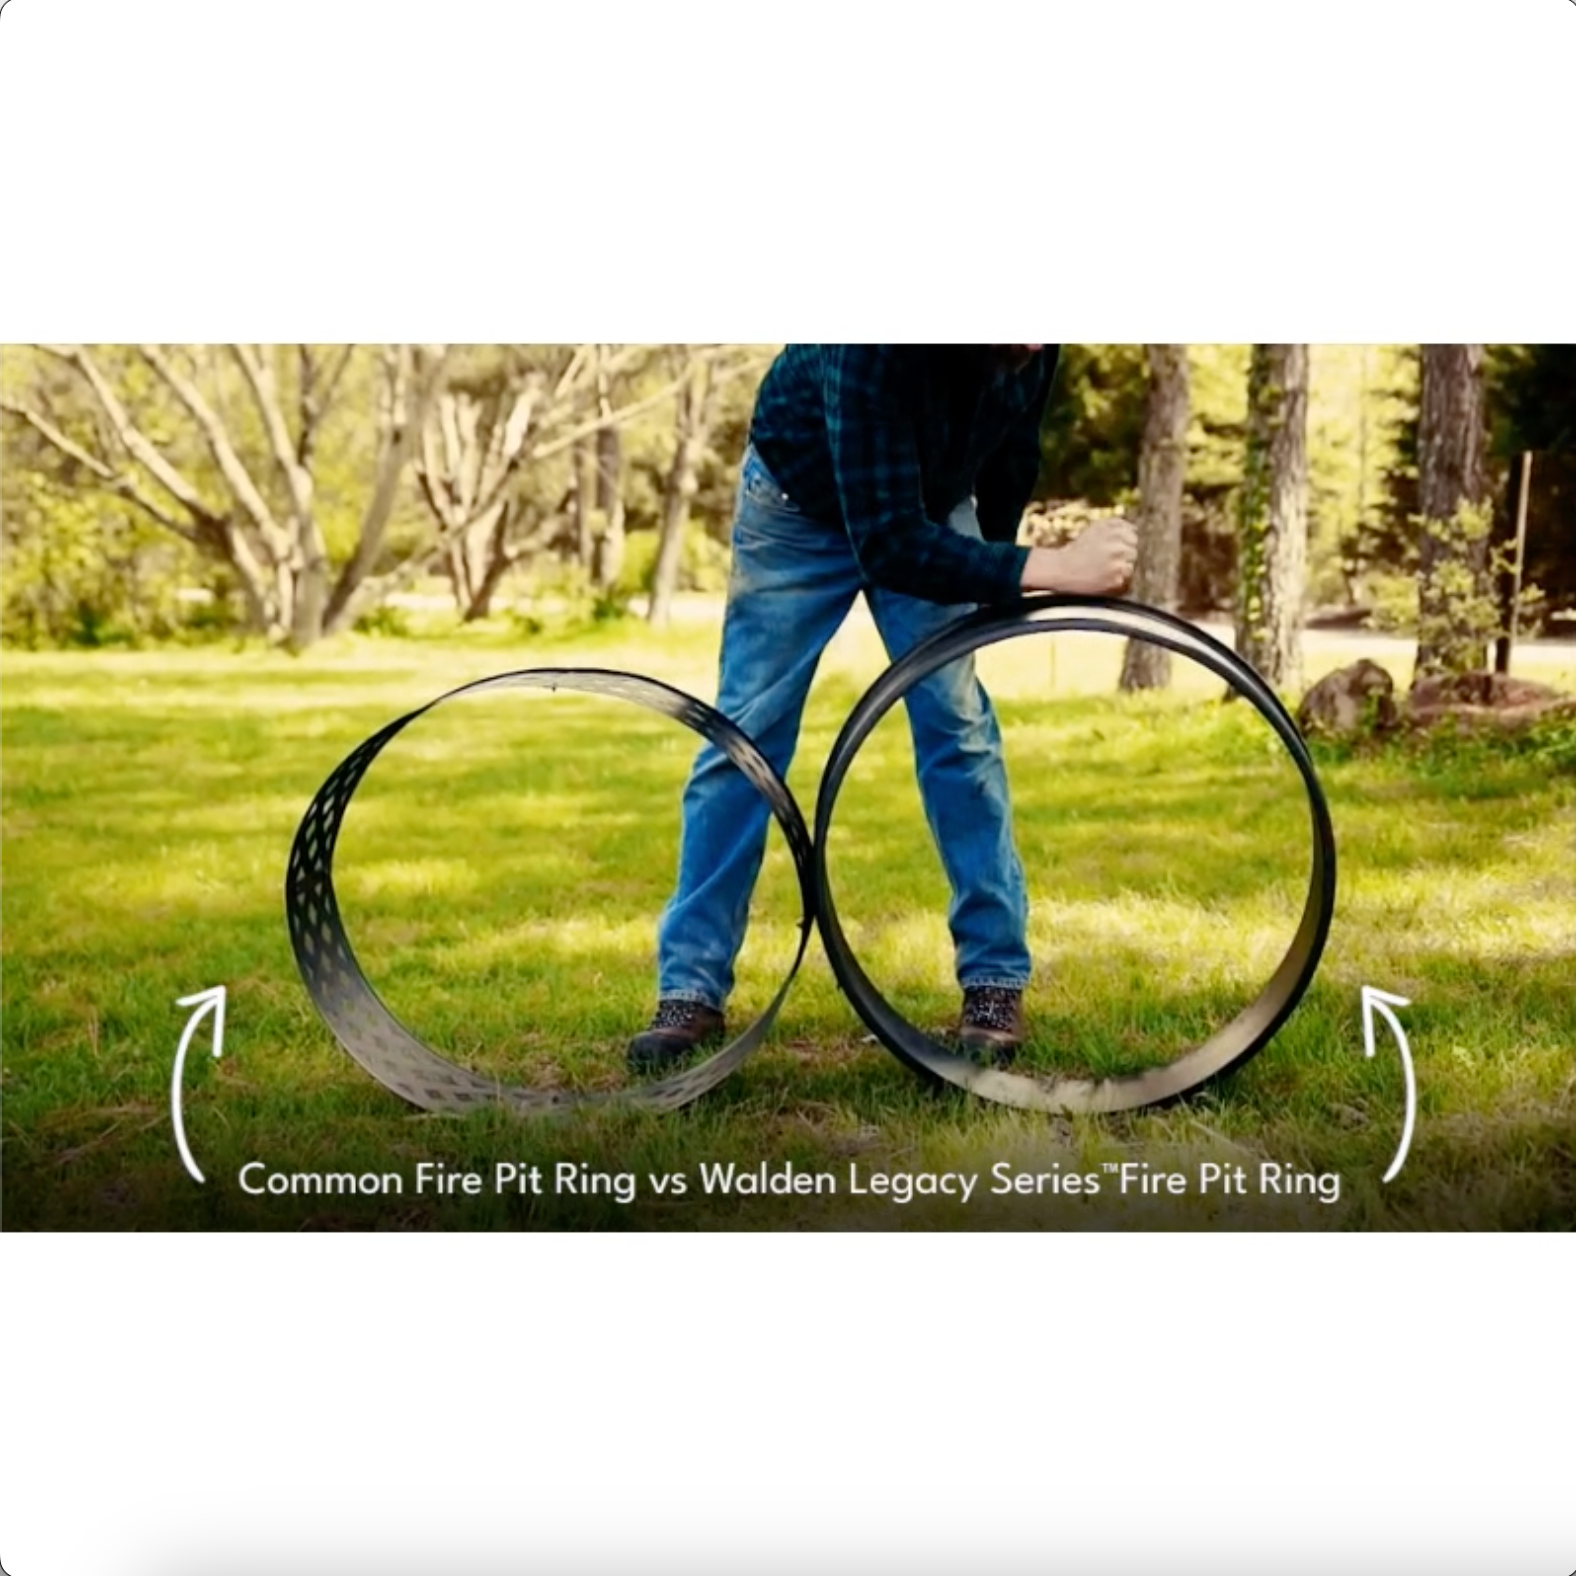 Video comparing a common flimsy fire pit to the sturdy  steel legacy fire pit ring